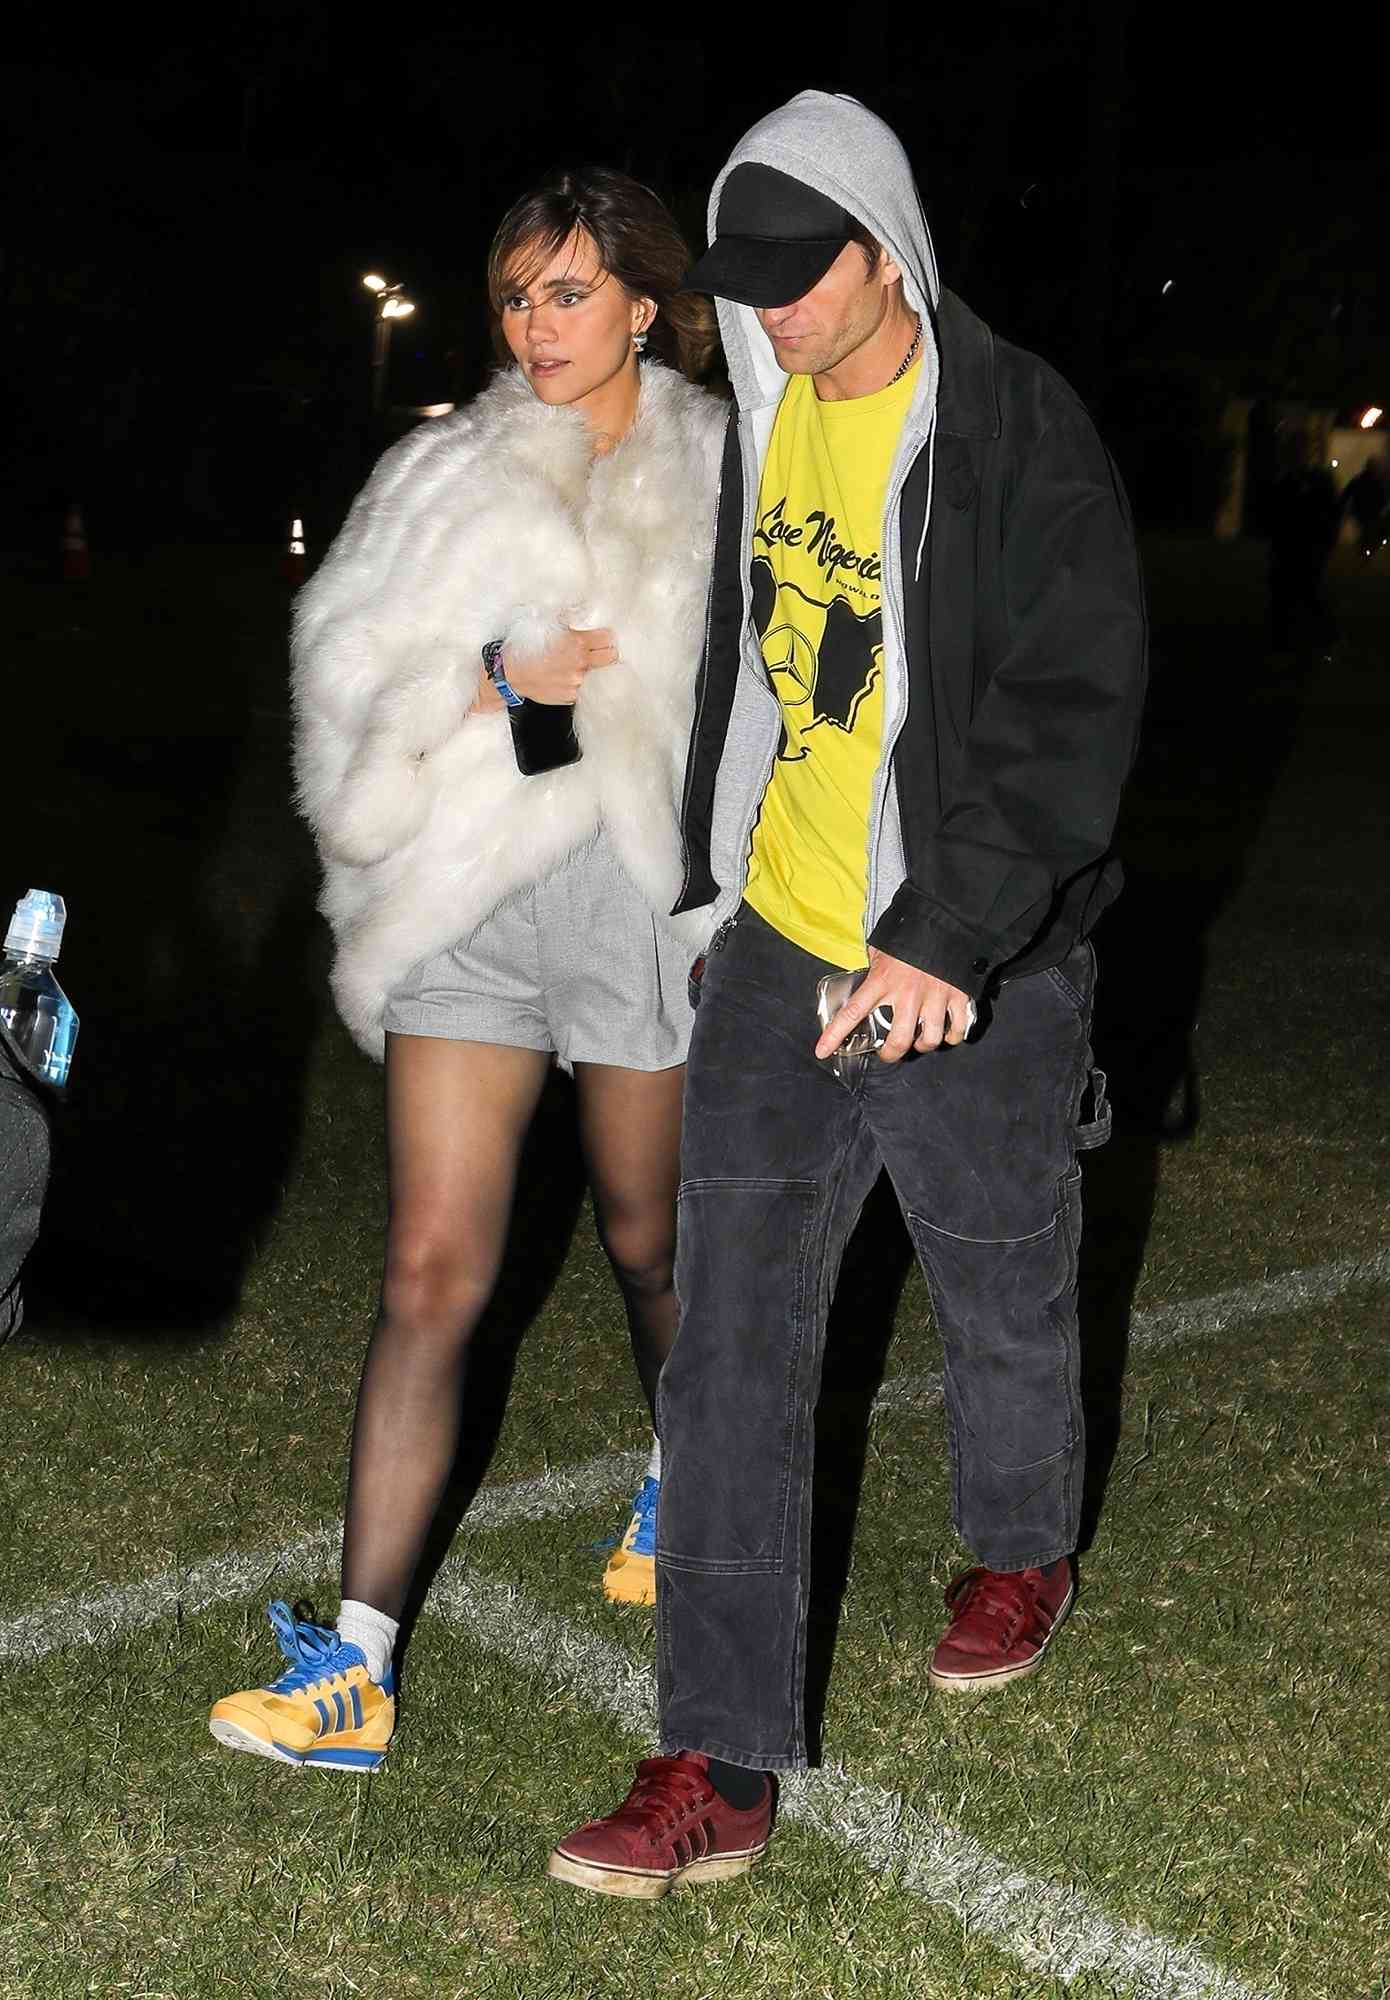 New parents Robert Pattinson and Suki Waterhouse seize a moment of respite from their newfound parental responsibilities, indulging in the vibrant atmosphere of the Coachella Valley Music and Arts Festival in Indio. Suki only months out from giving birth is spotted after her Weekend 1 performance with her fiance Rob Pattinson by her side.